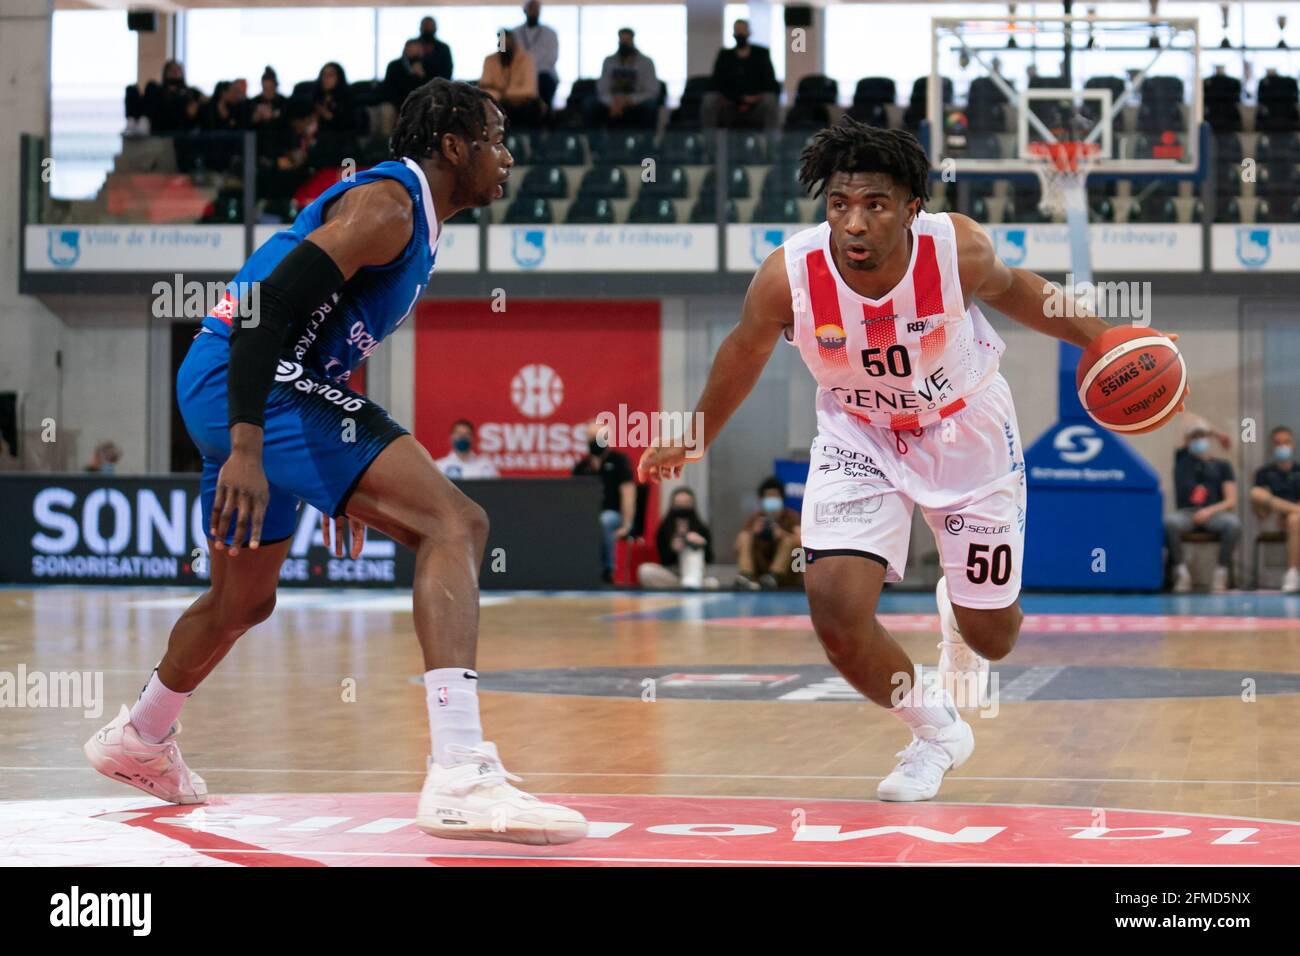 08.05.2021, Friborg, St-Leonard di Friborgo, Patrick Baumann Swiss Cup Men:  Lions de Geneve - Friborg Olympic, Am Ball Andre Williamson (Geneva)  against # 1 Boris Mbala (Friborg) (Photo by Til Buergy/Just Pictures/Sipa